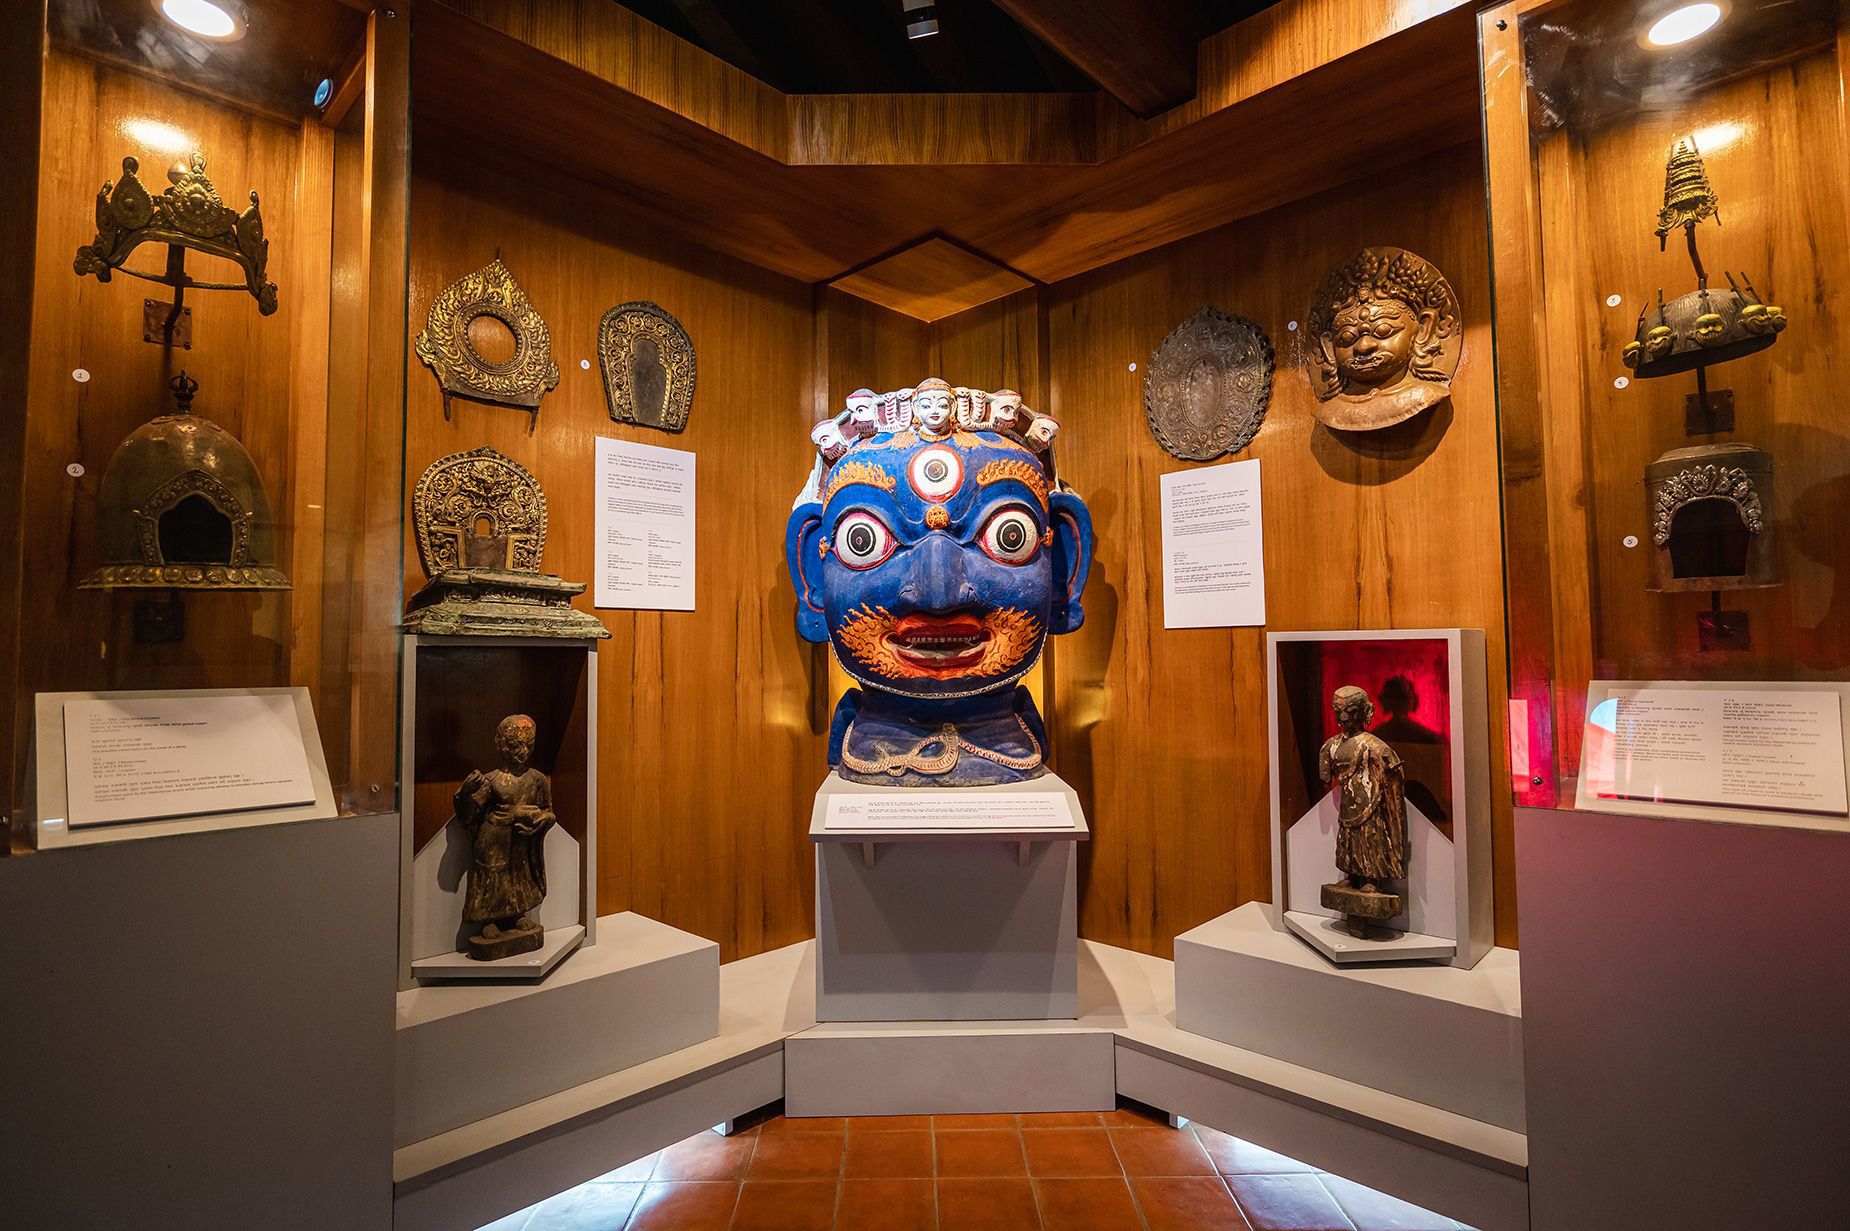 Objects on display at the Itumbaha Museum in Nepal, which was created as New York’s Rubin Museum of Art and Metropolitan Museum of Art returned artifacts taken from the 11th century Nepalese monastery.